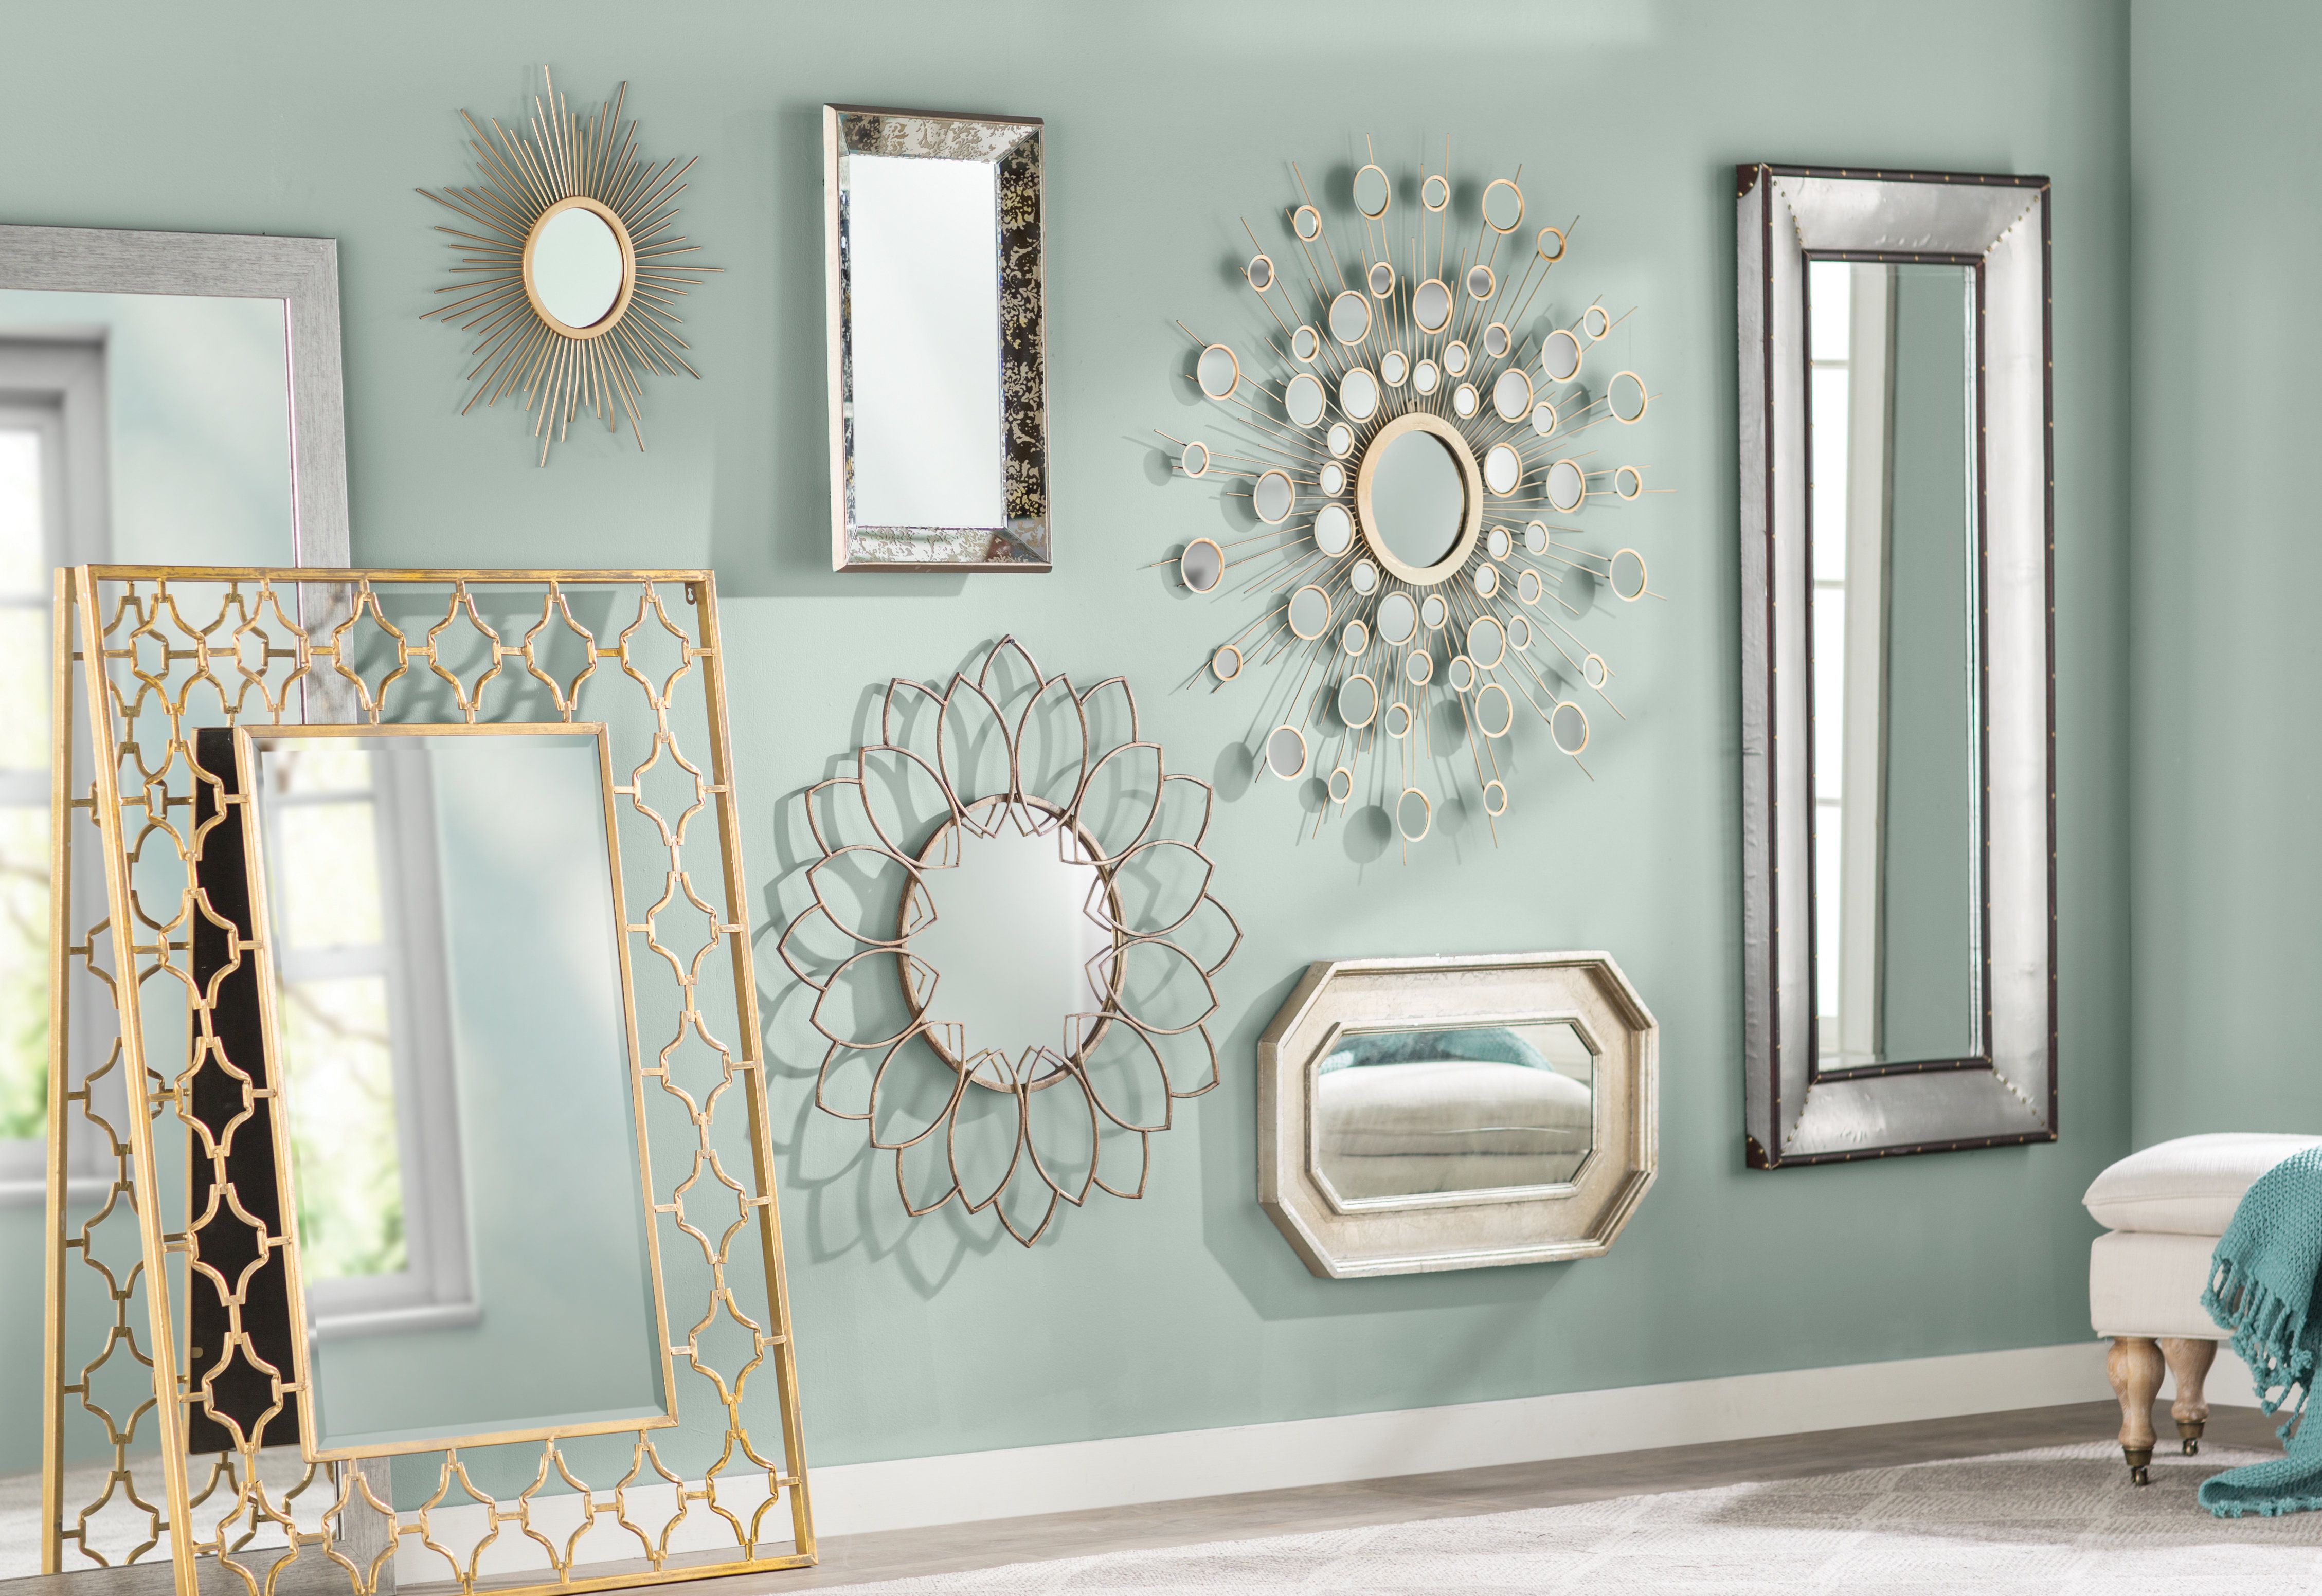 Willa Arlo Interiors Brynn Accent Mirror Intended For Brynn Accent Mirrors (View 2 of 20)